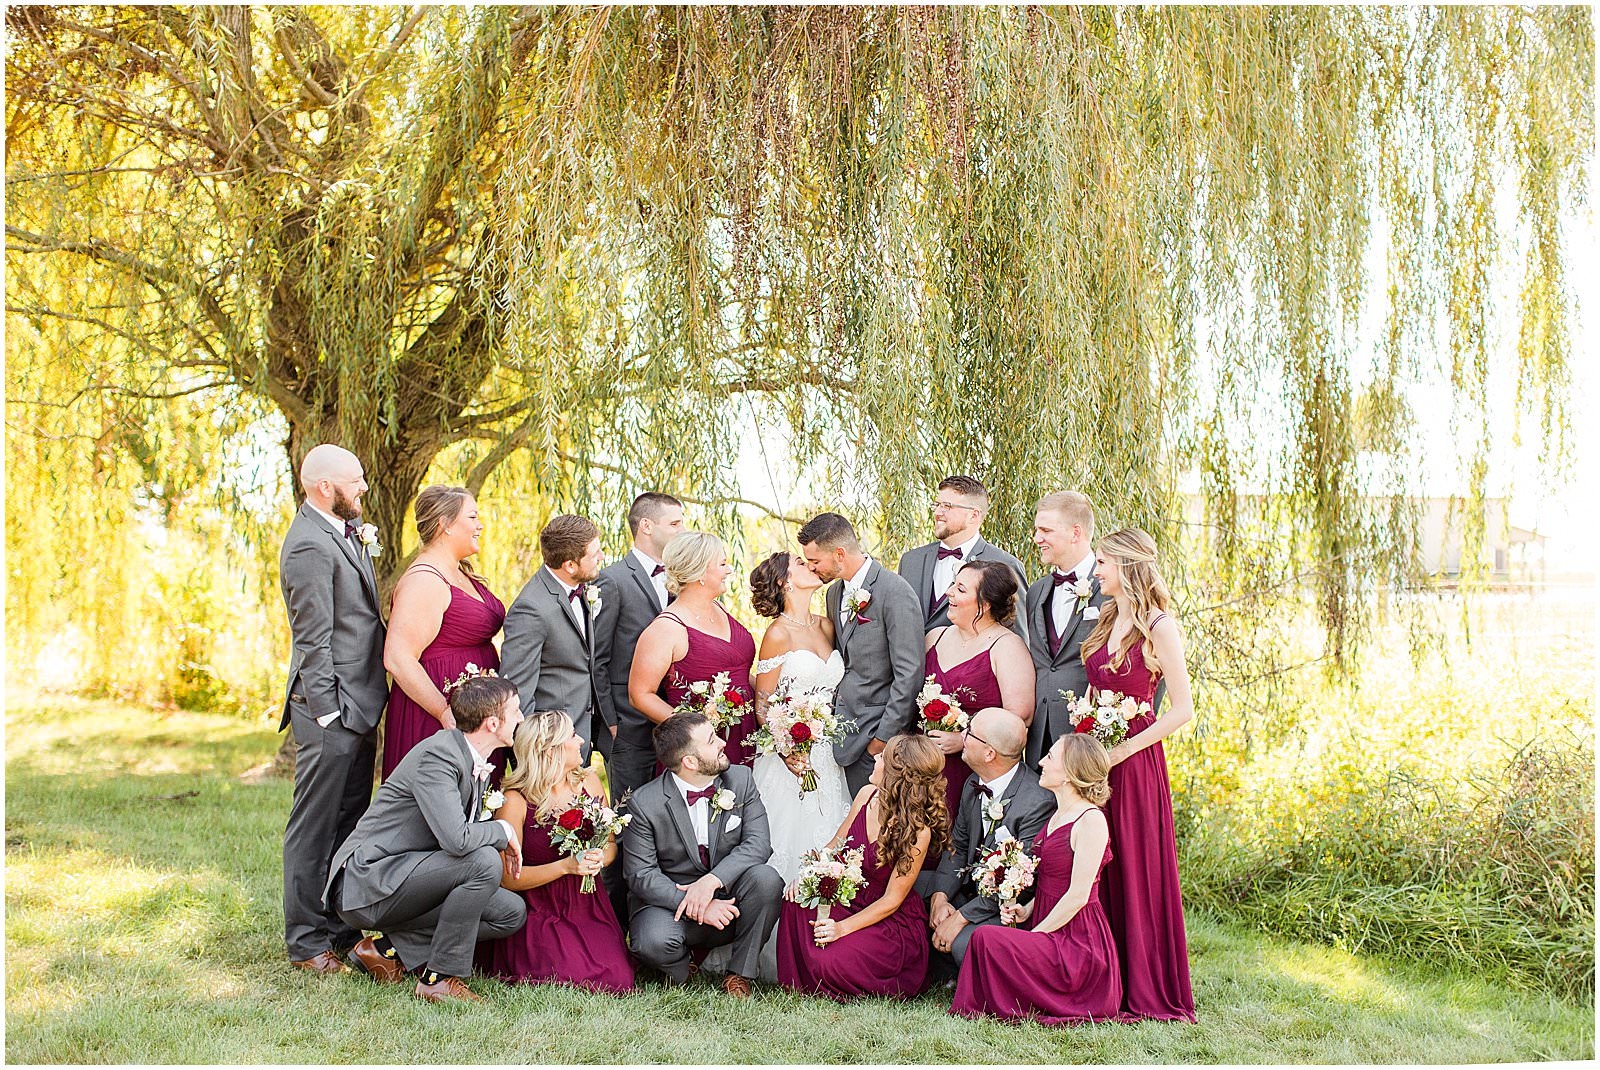 A Stunning Fall Wedding in Indianapolis, IN |. Sally and Andrew | Bret and Brandie Photography 0087.jpg